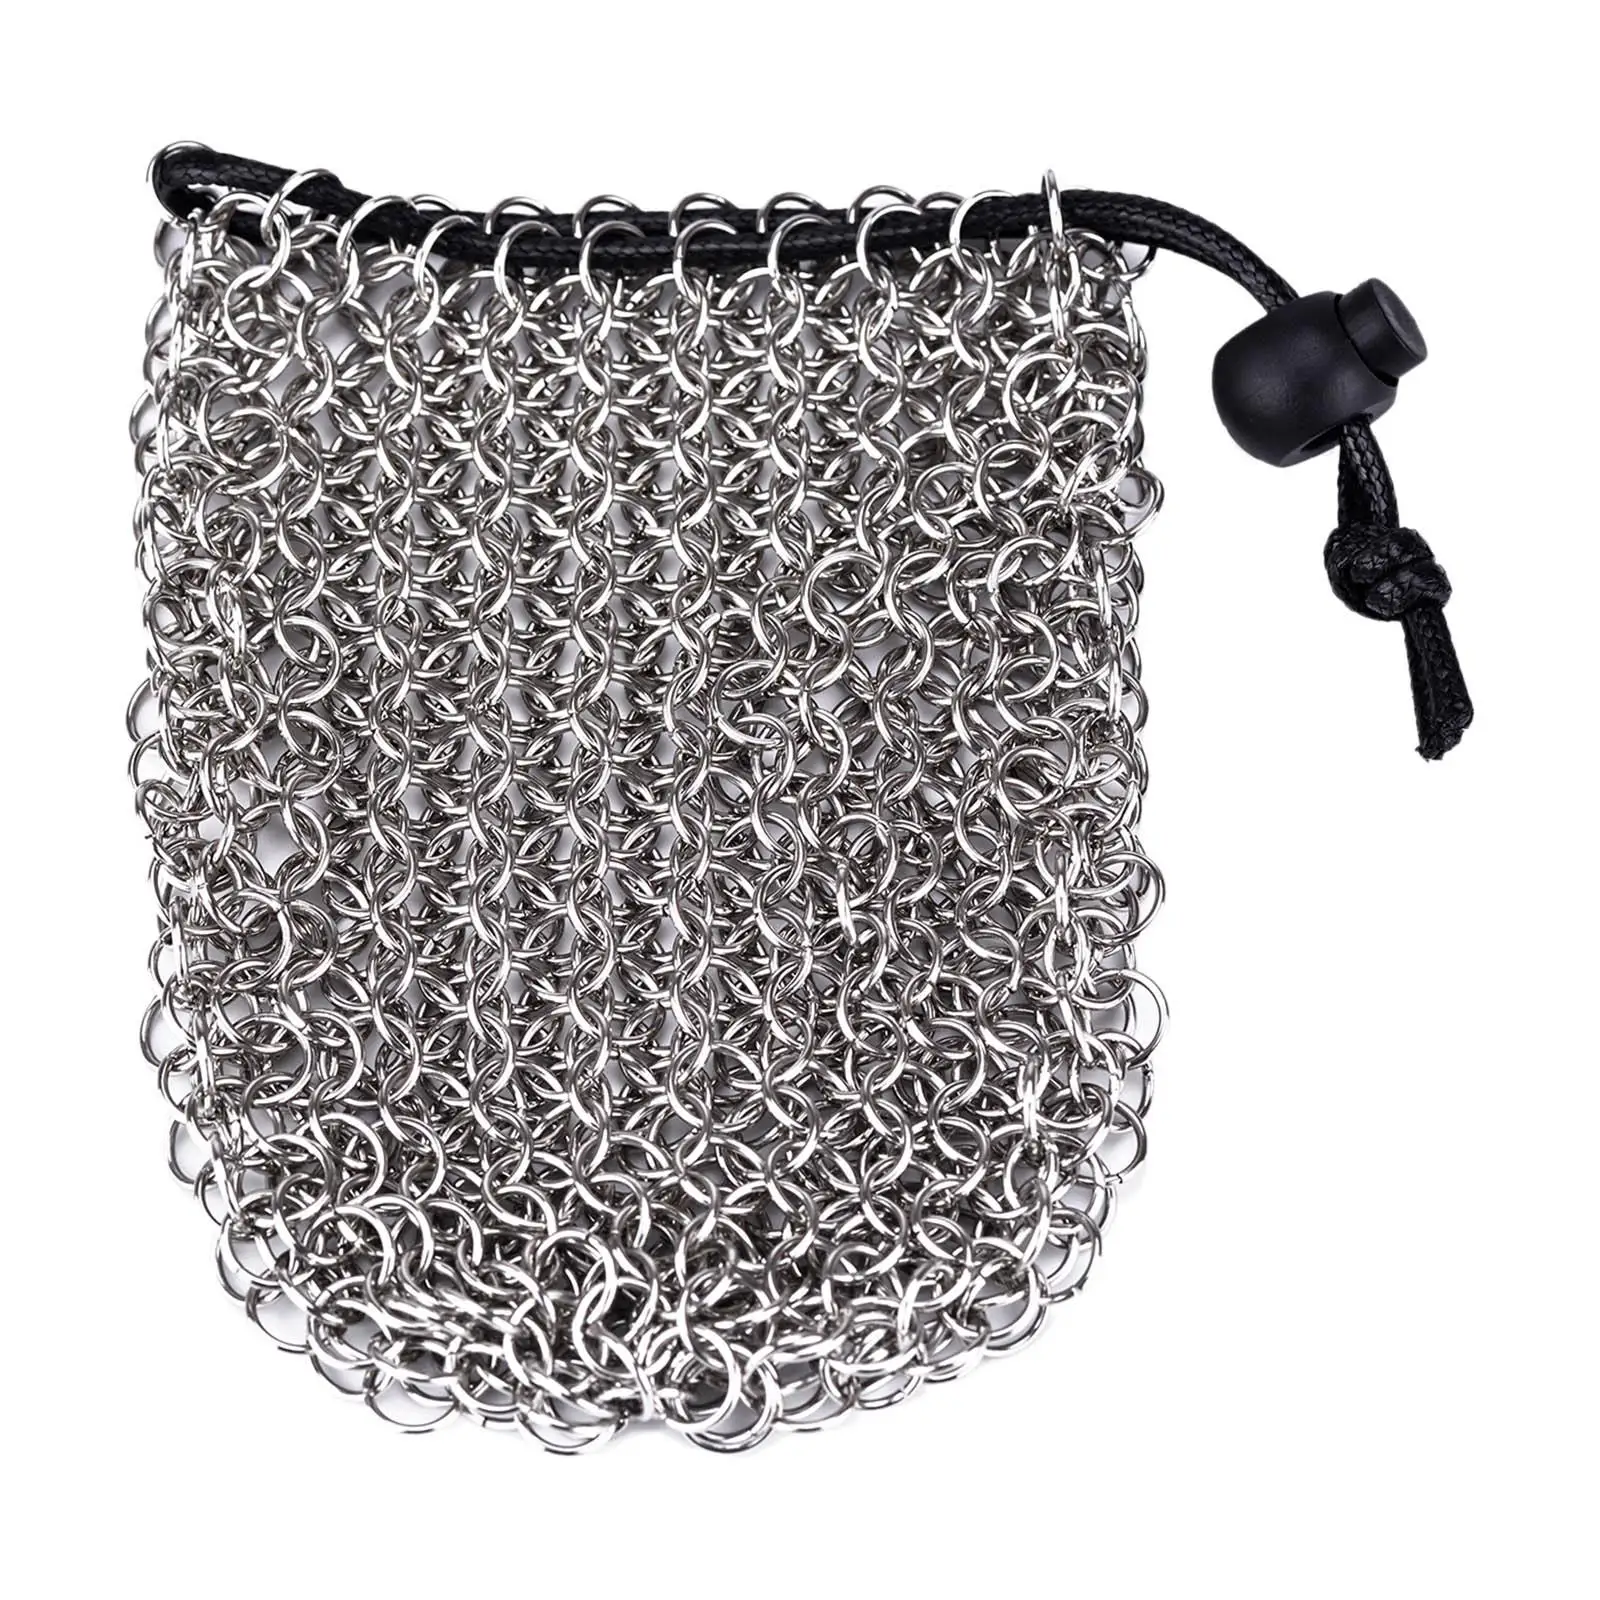 Upgrade Dice Bag Stainless Steel Dice Tray Bag for Board